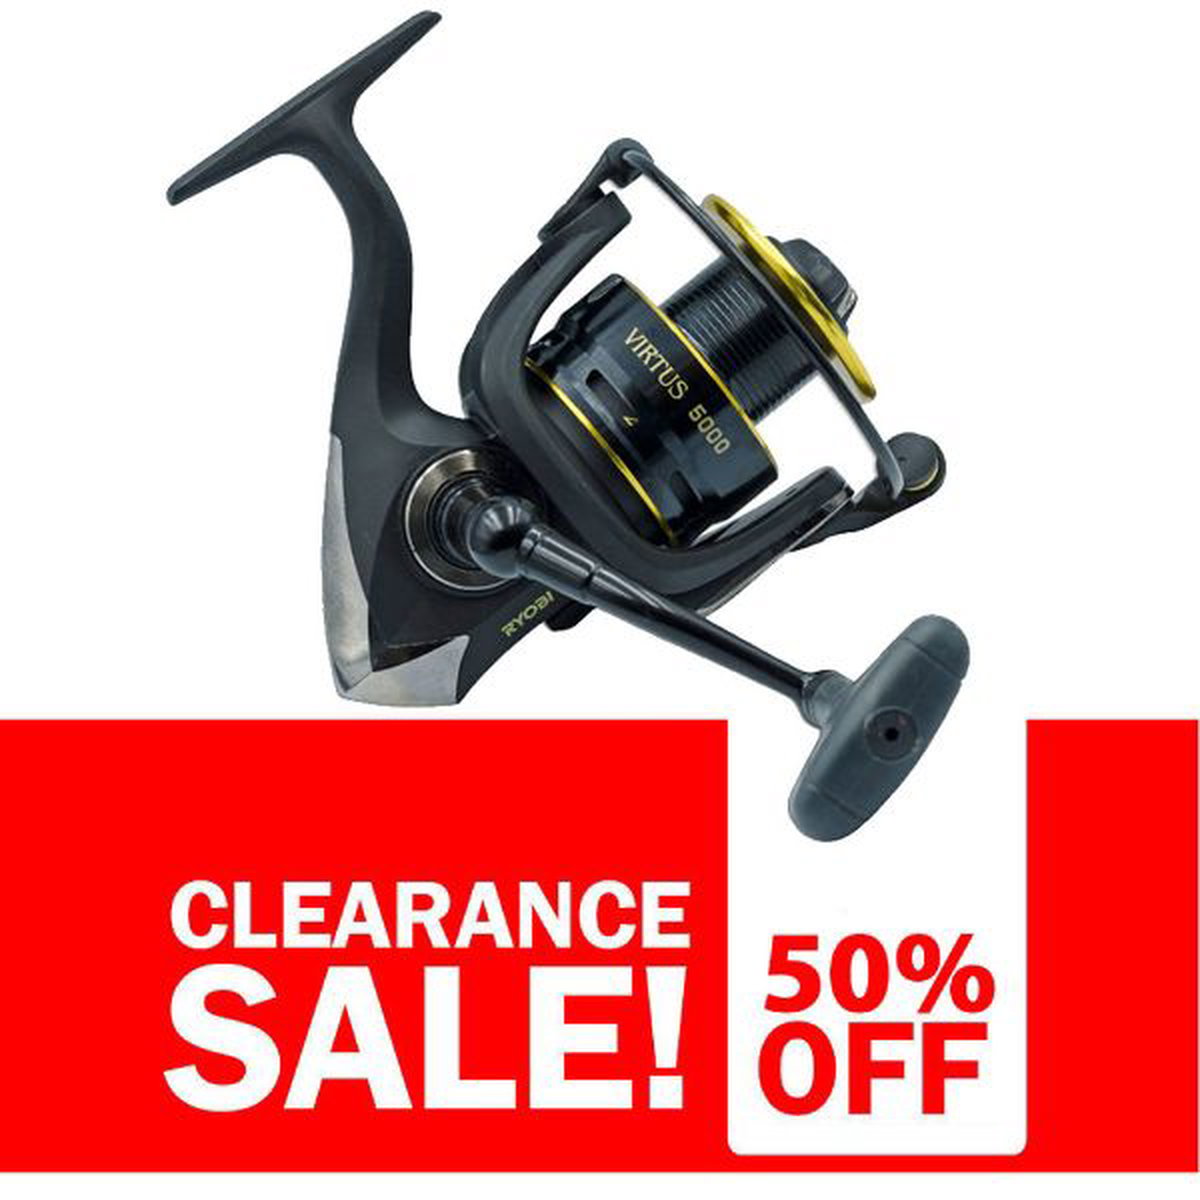 shimano stella 3000 Today's Deals - OFF 60%